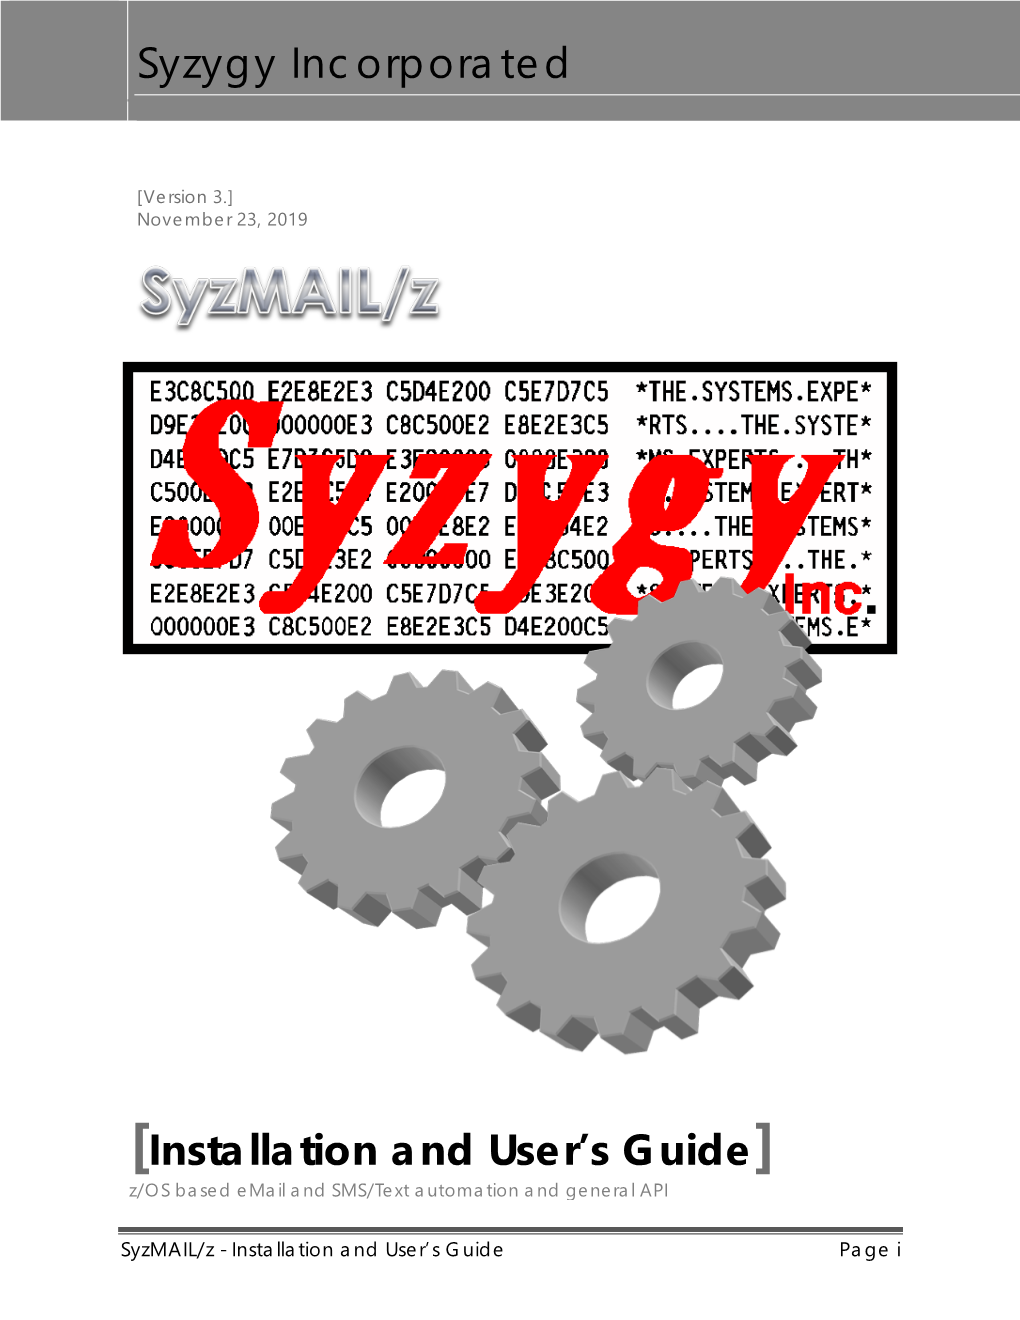 Syzmail/Z V3 Installation and Users Guide